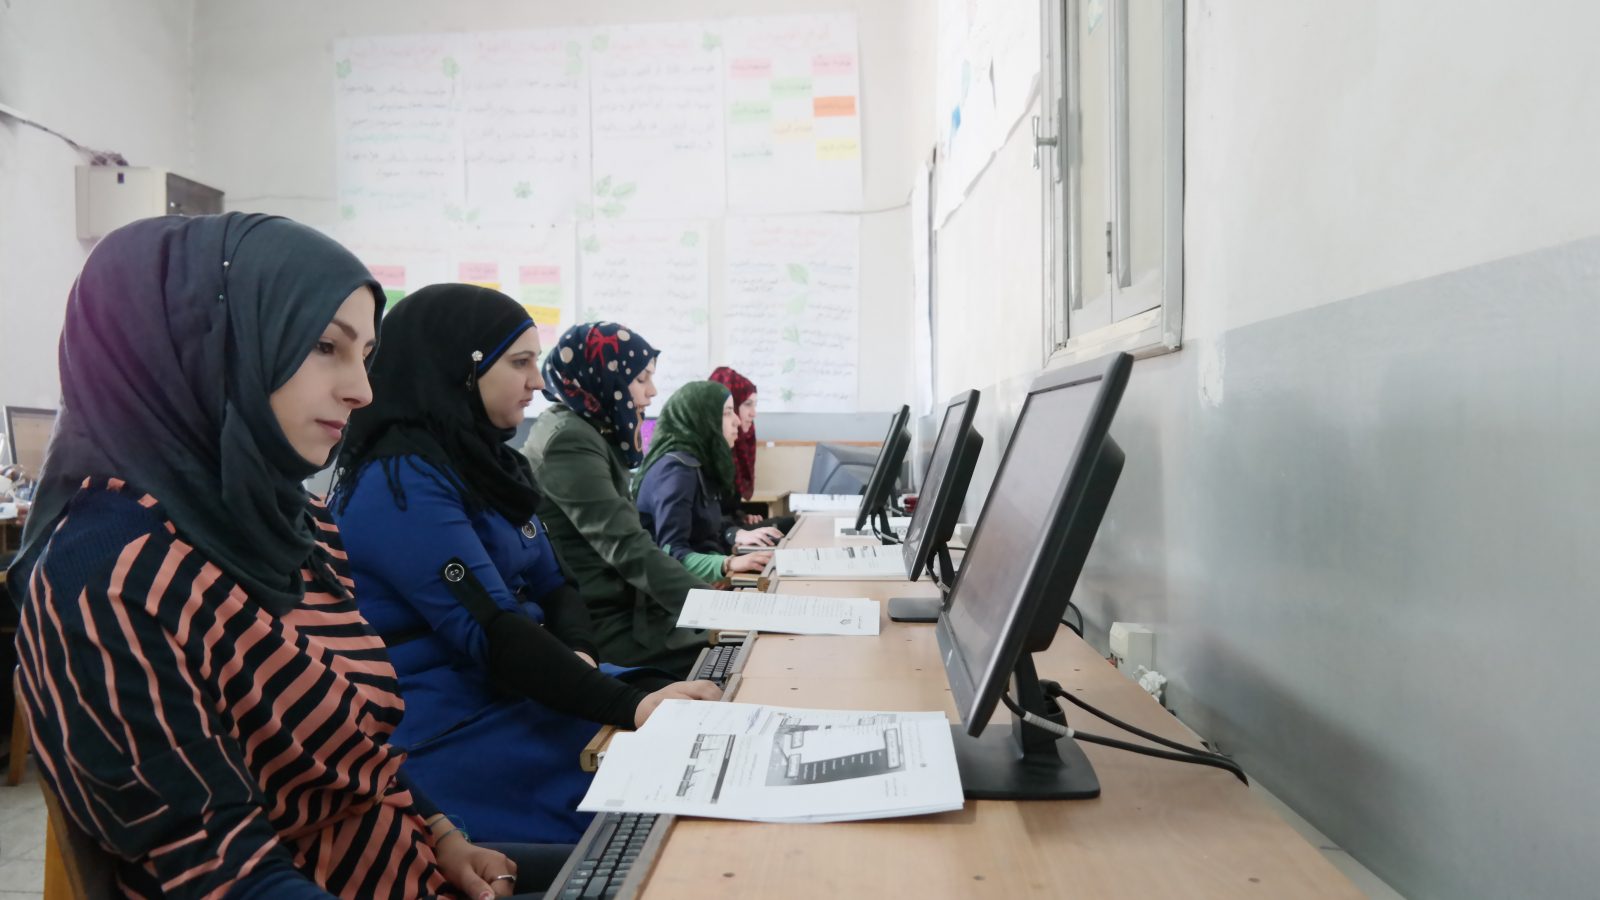 A new electronic application is supporting young Palestinians by collecting data on students and graduates of vocational training centres and tracking their progress in their academic and professional careers.